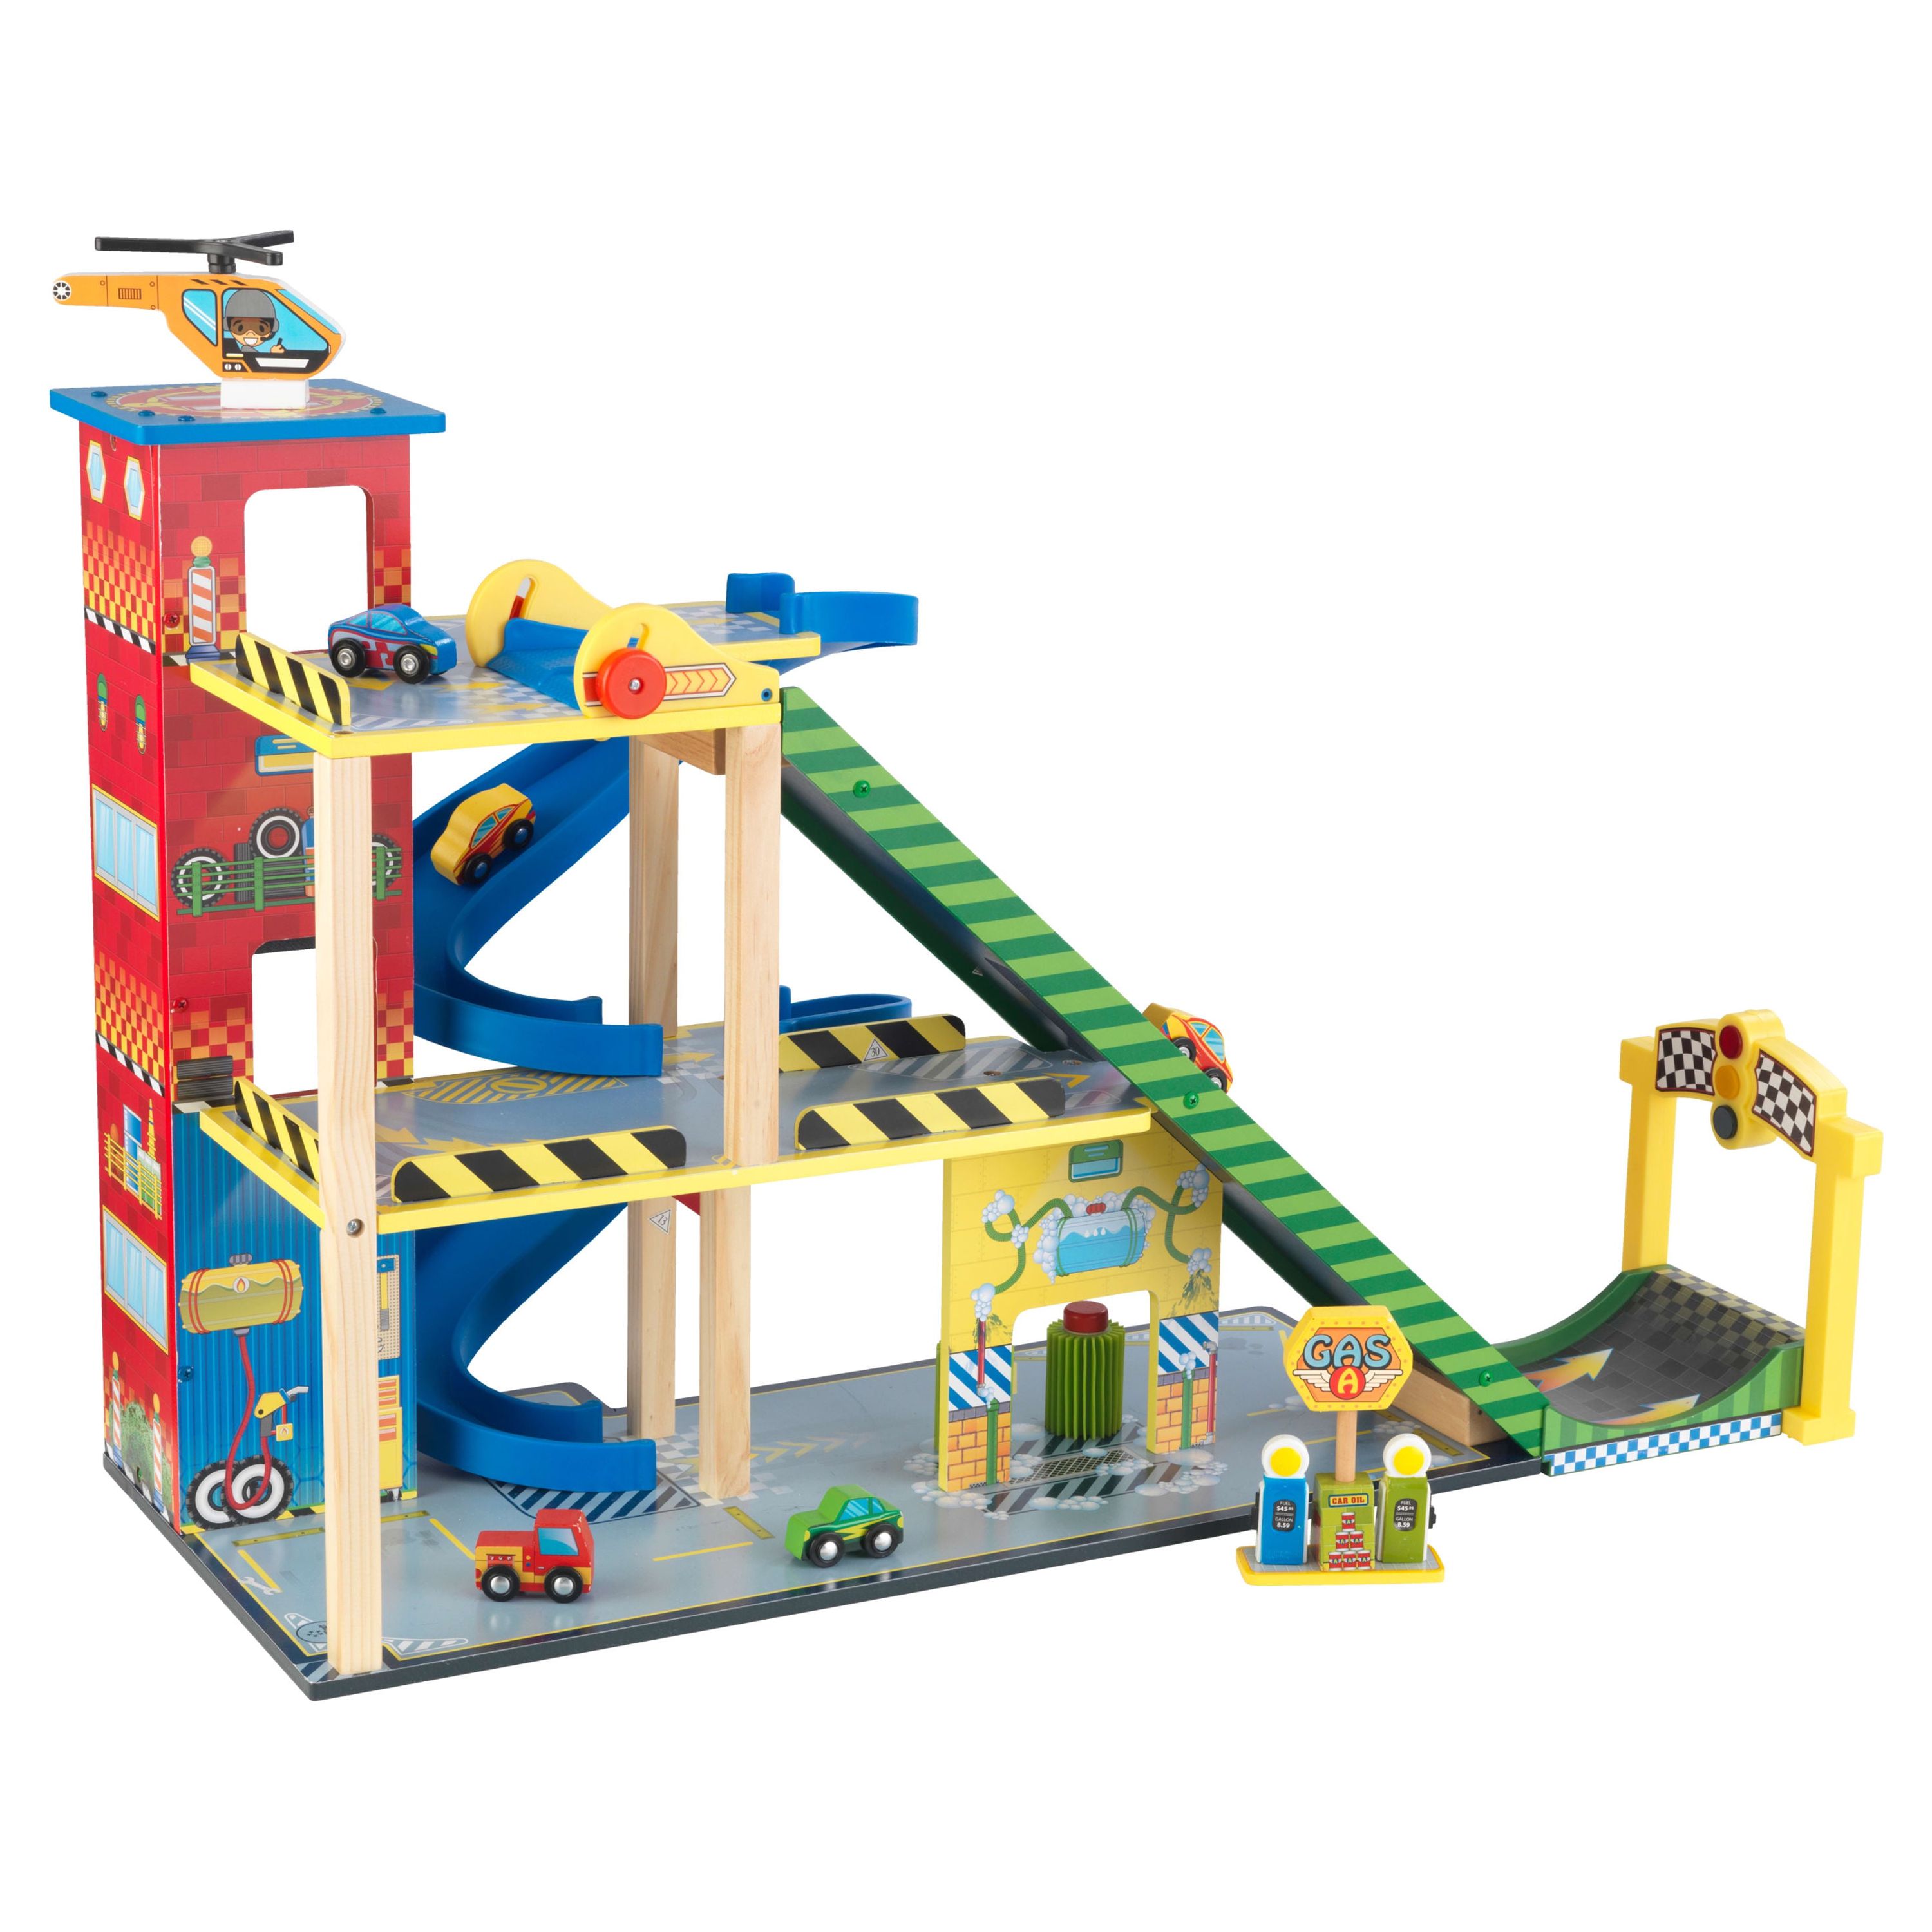 KidKraft Mega Ramp Wooden Racing Play Set with 5 Vehicles. Lights and Moving Elevator - image 1 of 9